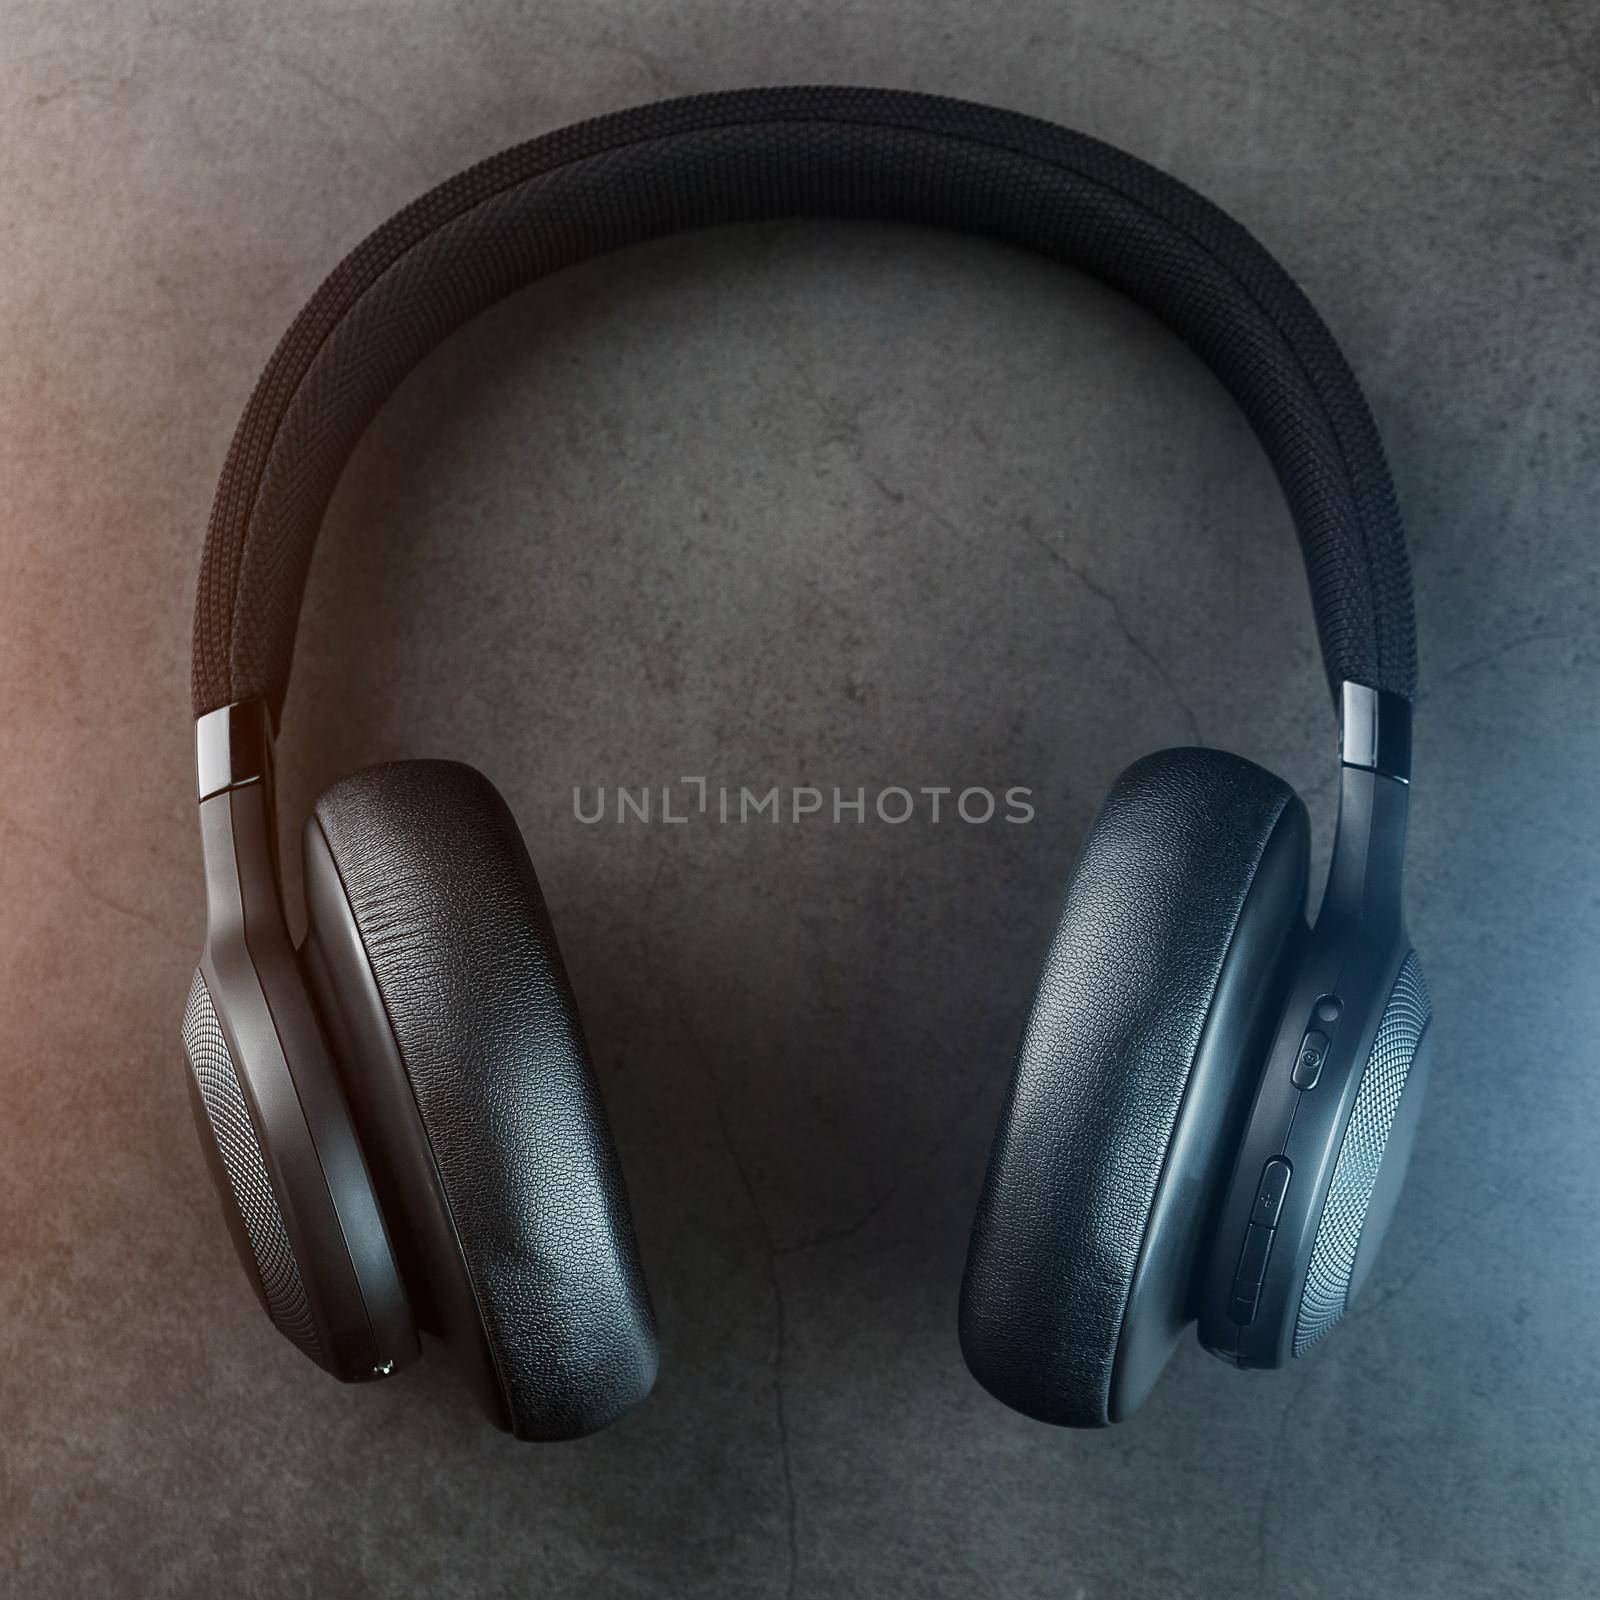 Wireless black headphones on a dark background with blue and orange backlight. On-ear headphones for playing games and listening to music tracks by AlexGrec